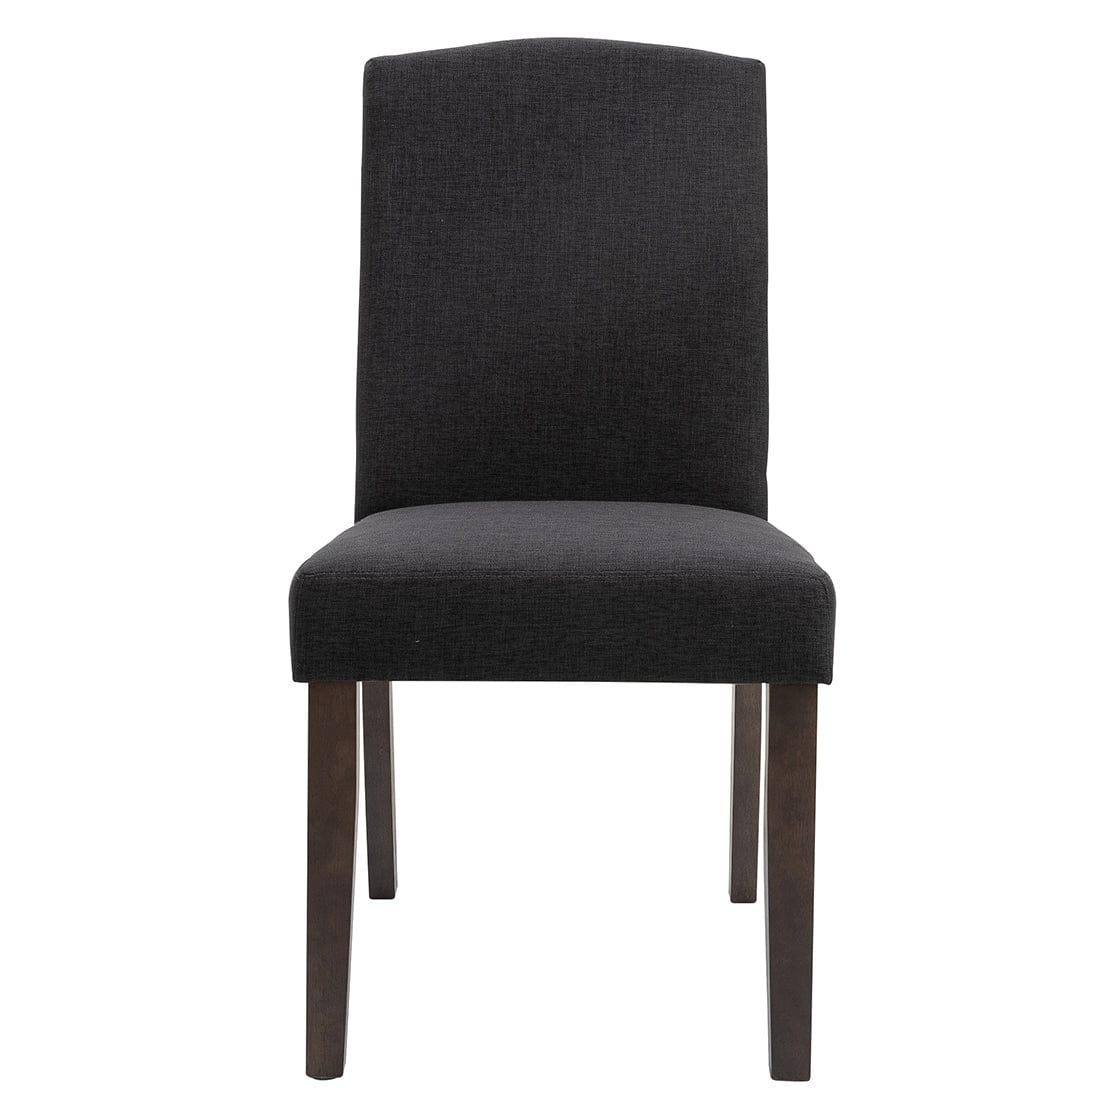 House Journey Lethbridge Dining Chair - Charcoal